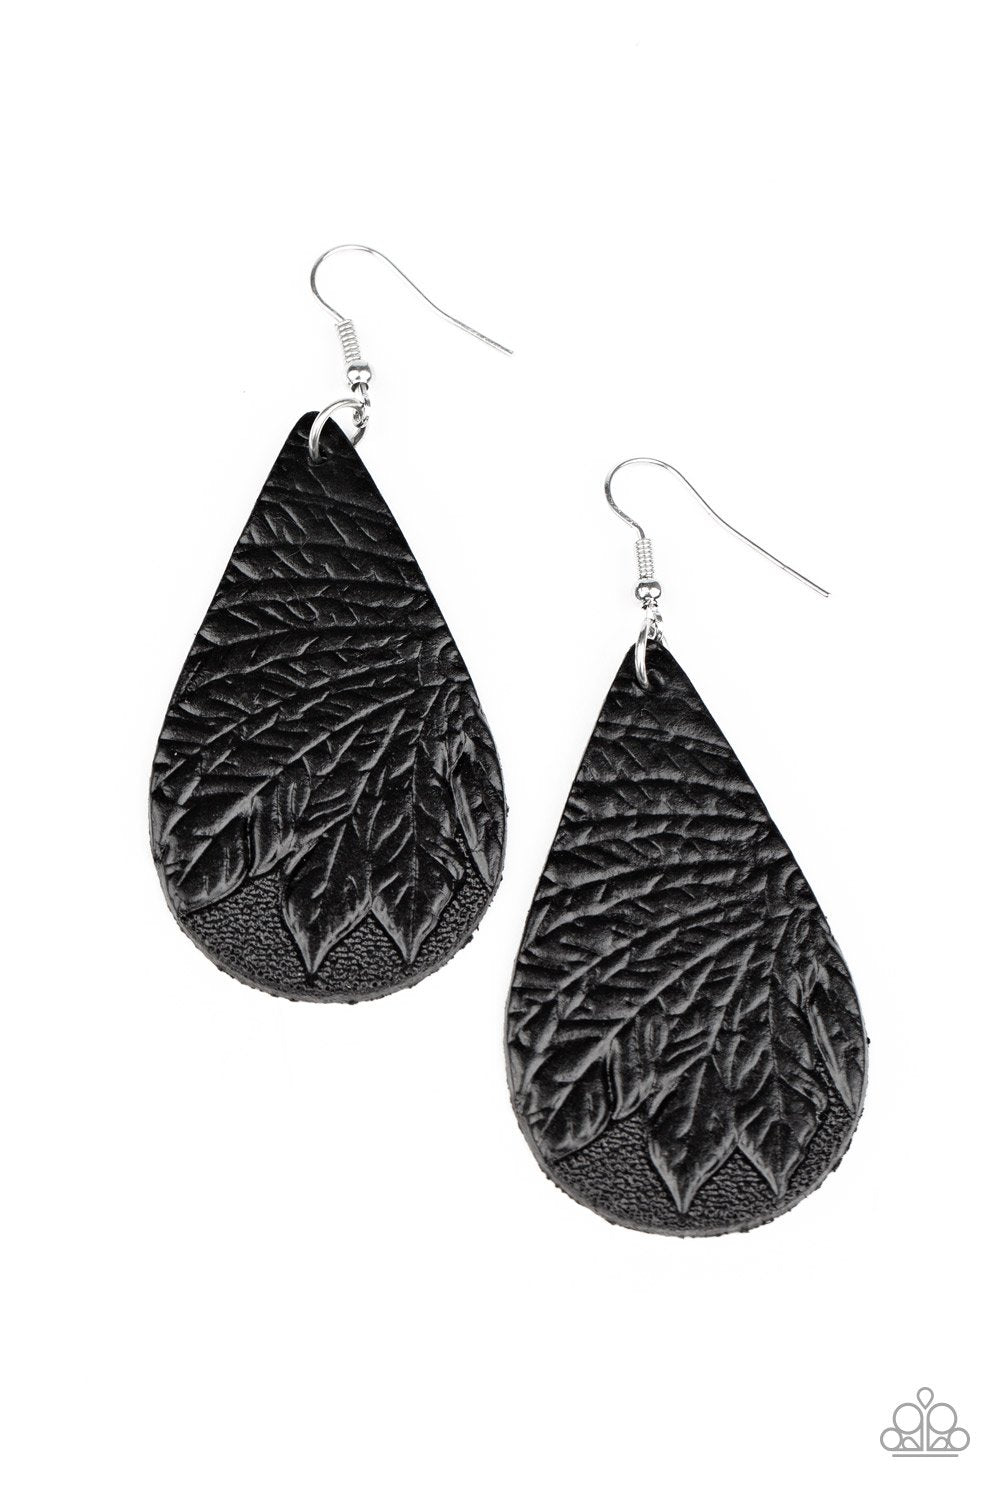 Everyone Remain PALM! Black Leather Earrings - Paparazzi Accessories - lightbox -CarasShop.com - $5 Jewelry by Cara Jewels